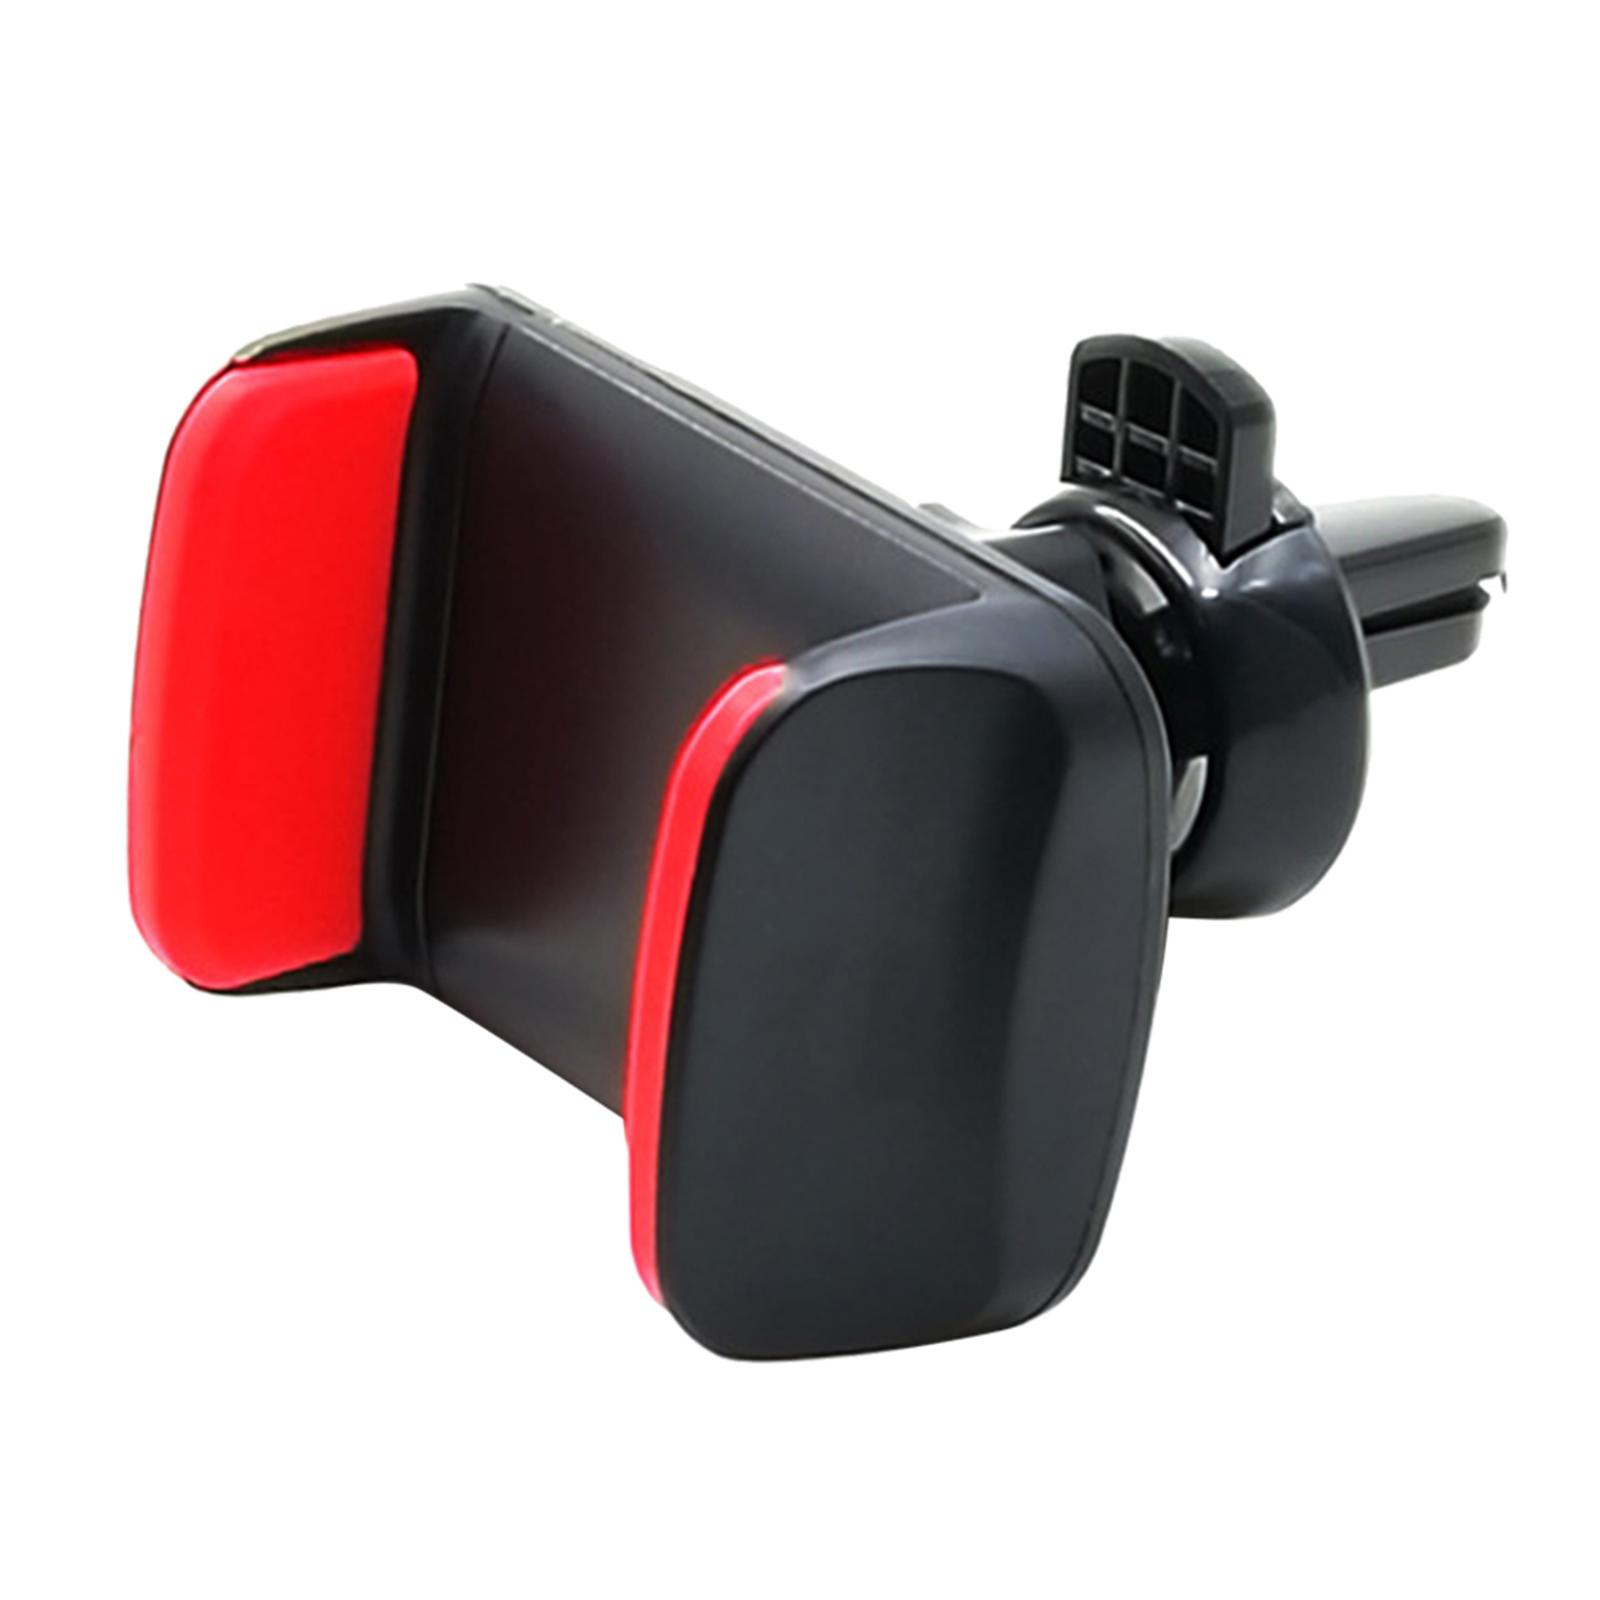 Suction Cup Universal Car Phone Holder Silicone for Auto Air Vent Smartphone air outlet black red